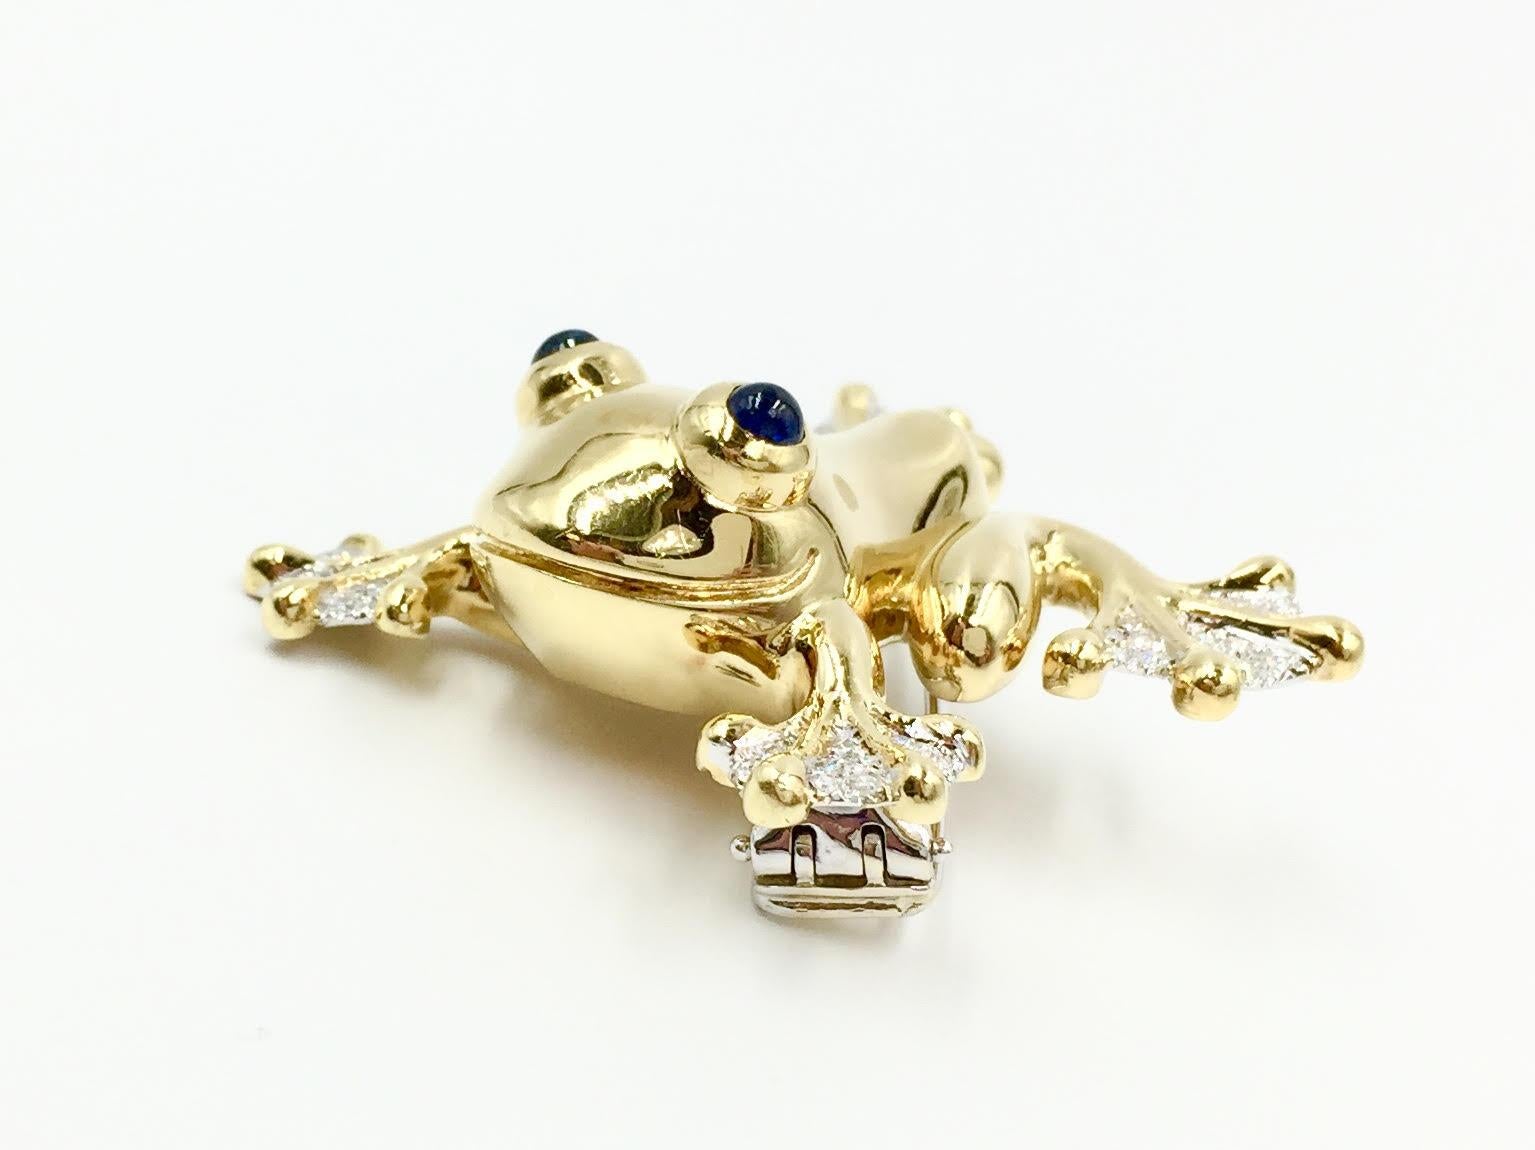 Women's or Men's 18 Karat Gold Frog Brooch with Diamonds and Blue Sapphires